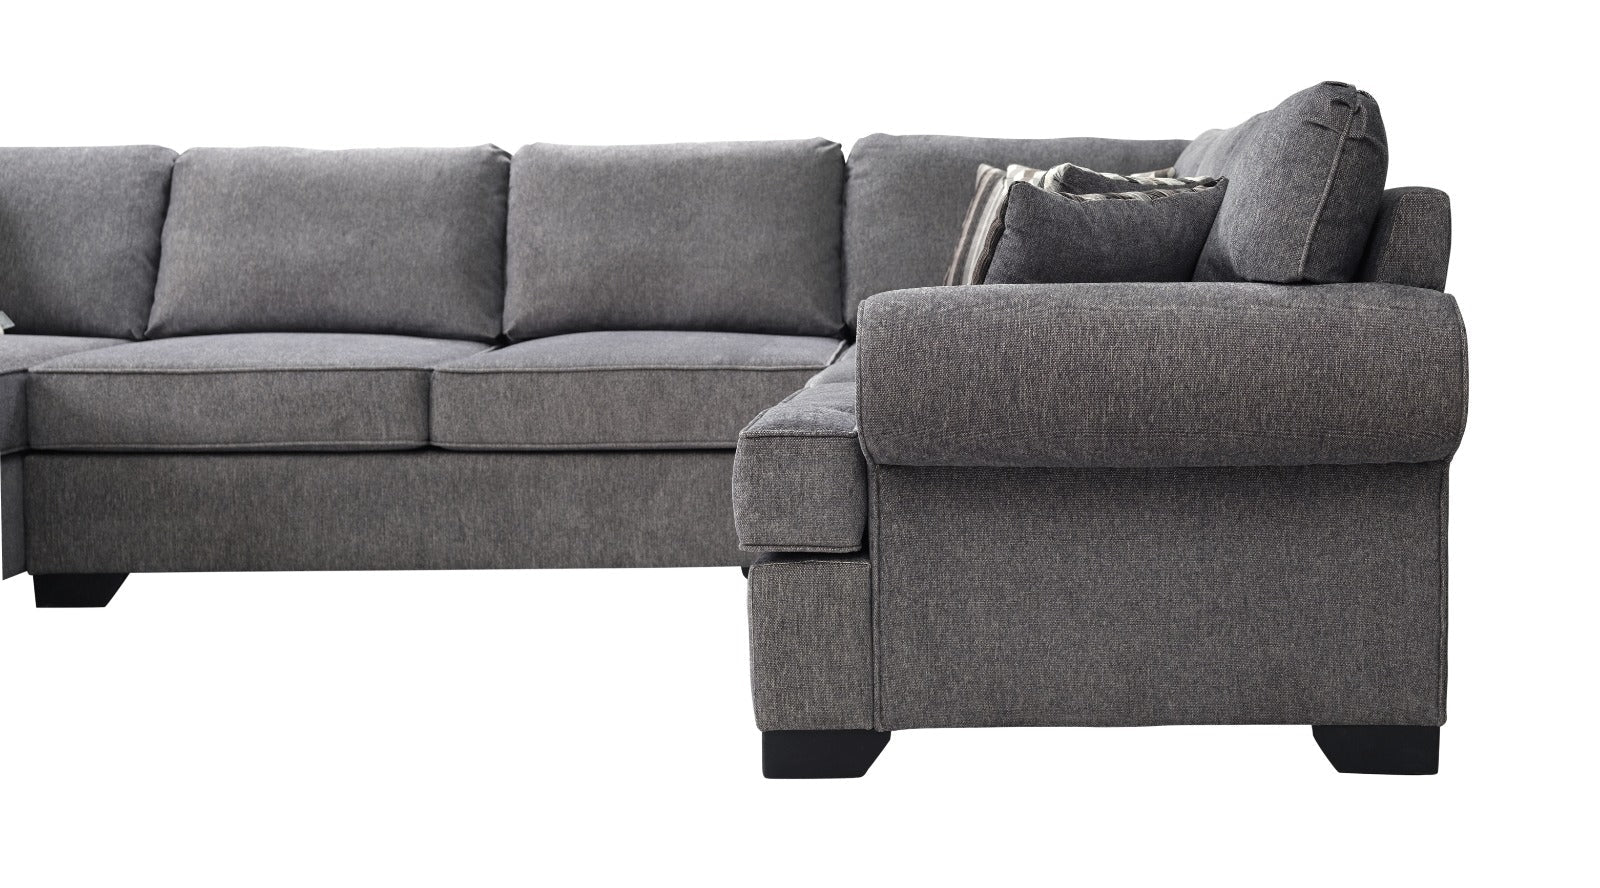 afgunst Netto ketting Millwood Pewter LAF Chaise Sectional from Nova Furniture – Luna Furniture